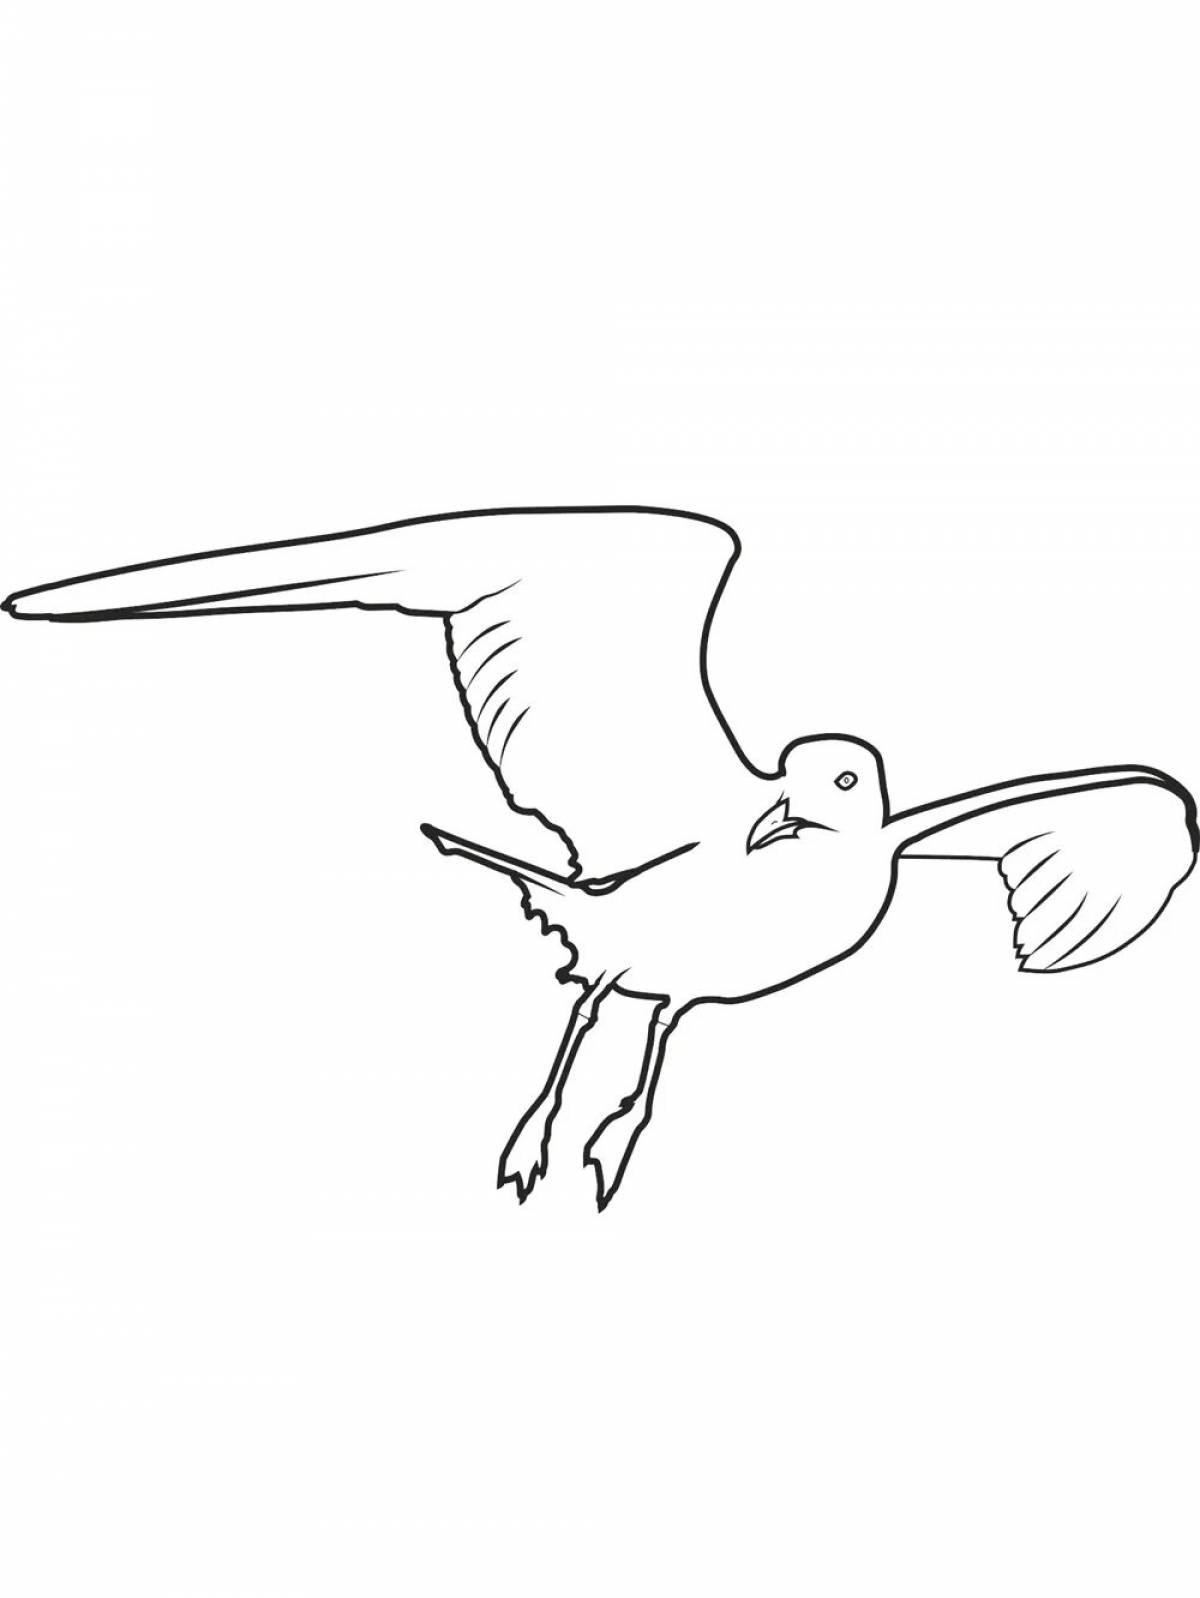 Seagull coloring pages for kids